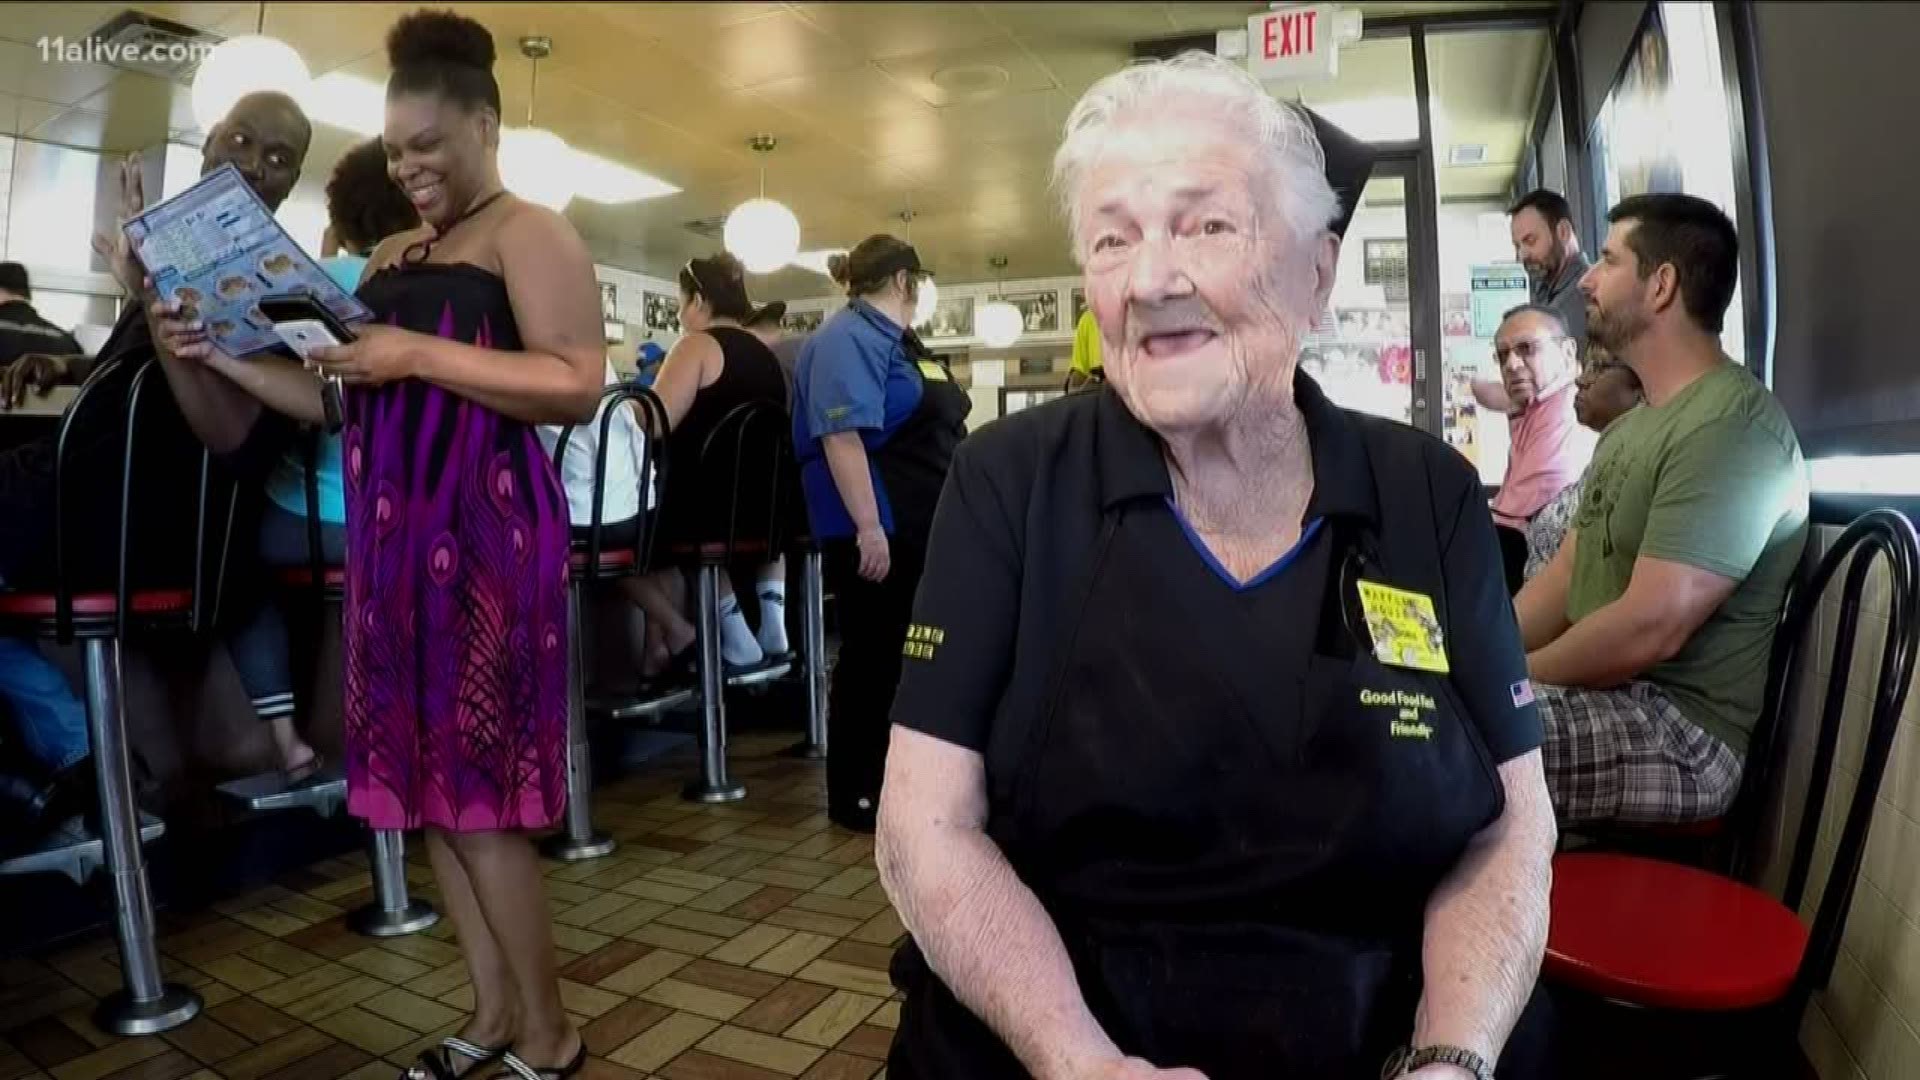 The 85-year-old Dallas woman said she doesn't plan on leaving anytime soon.